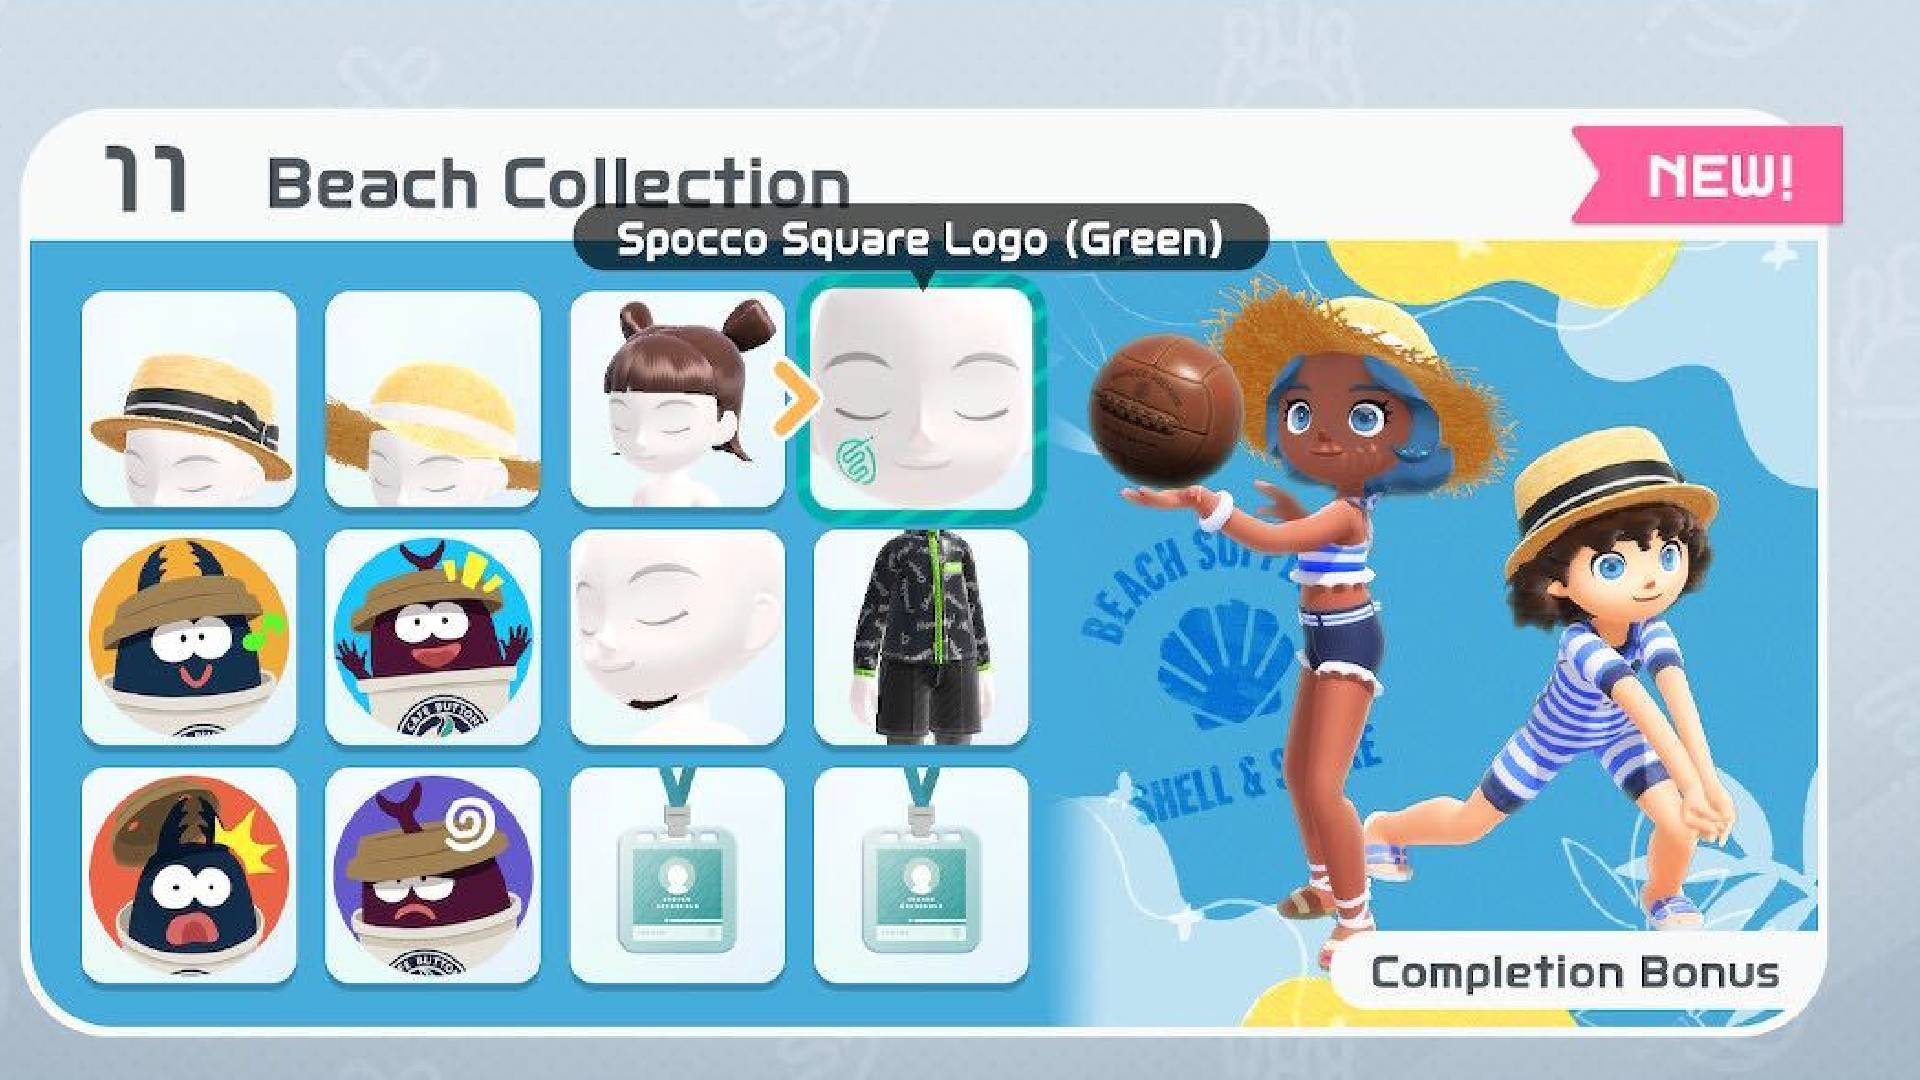 Nintendo Switch Sports cosmetics: A series of outfits are visible for player avatars, called the beach collection